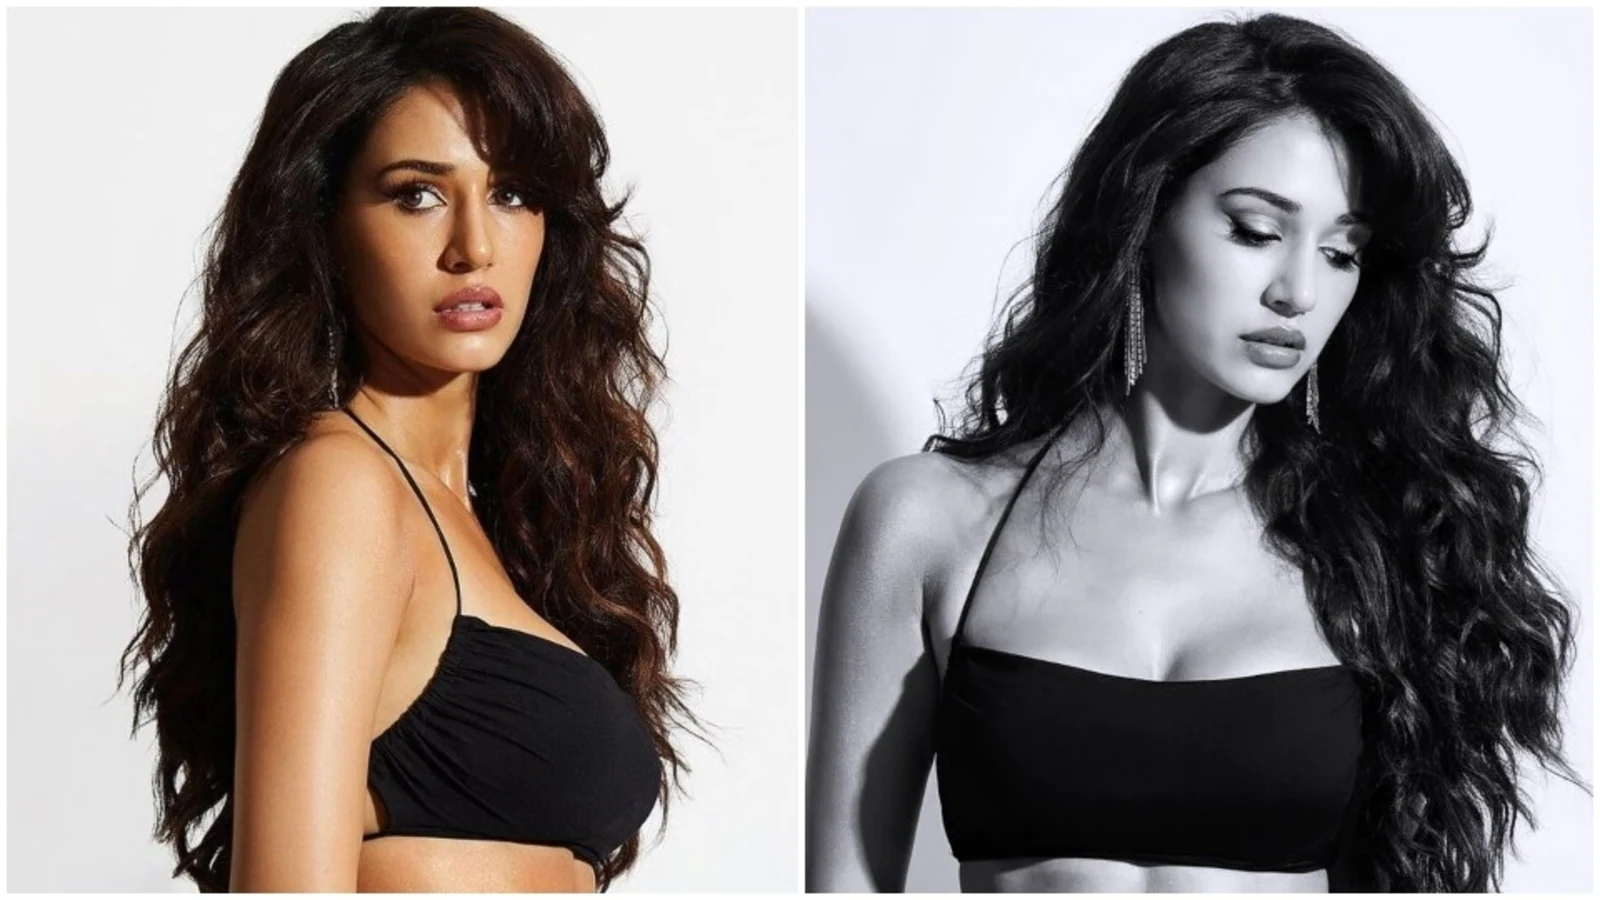  Disha Patani, The Queen of Jaw-Dropping Style in a Black Bra